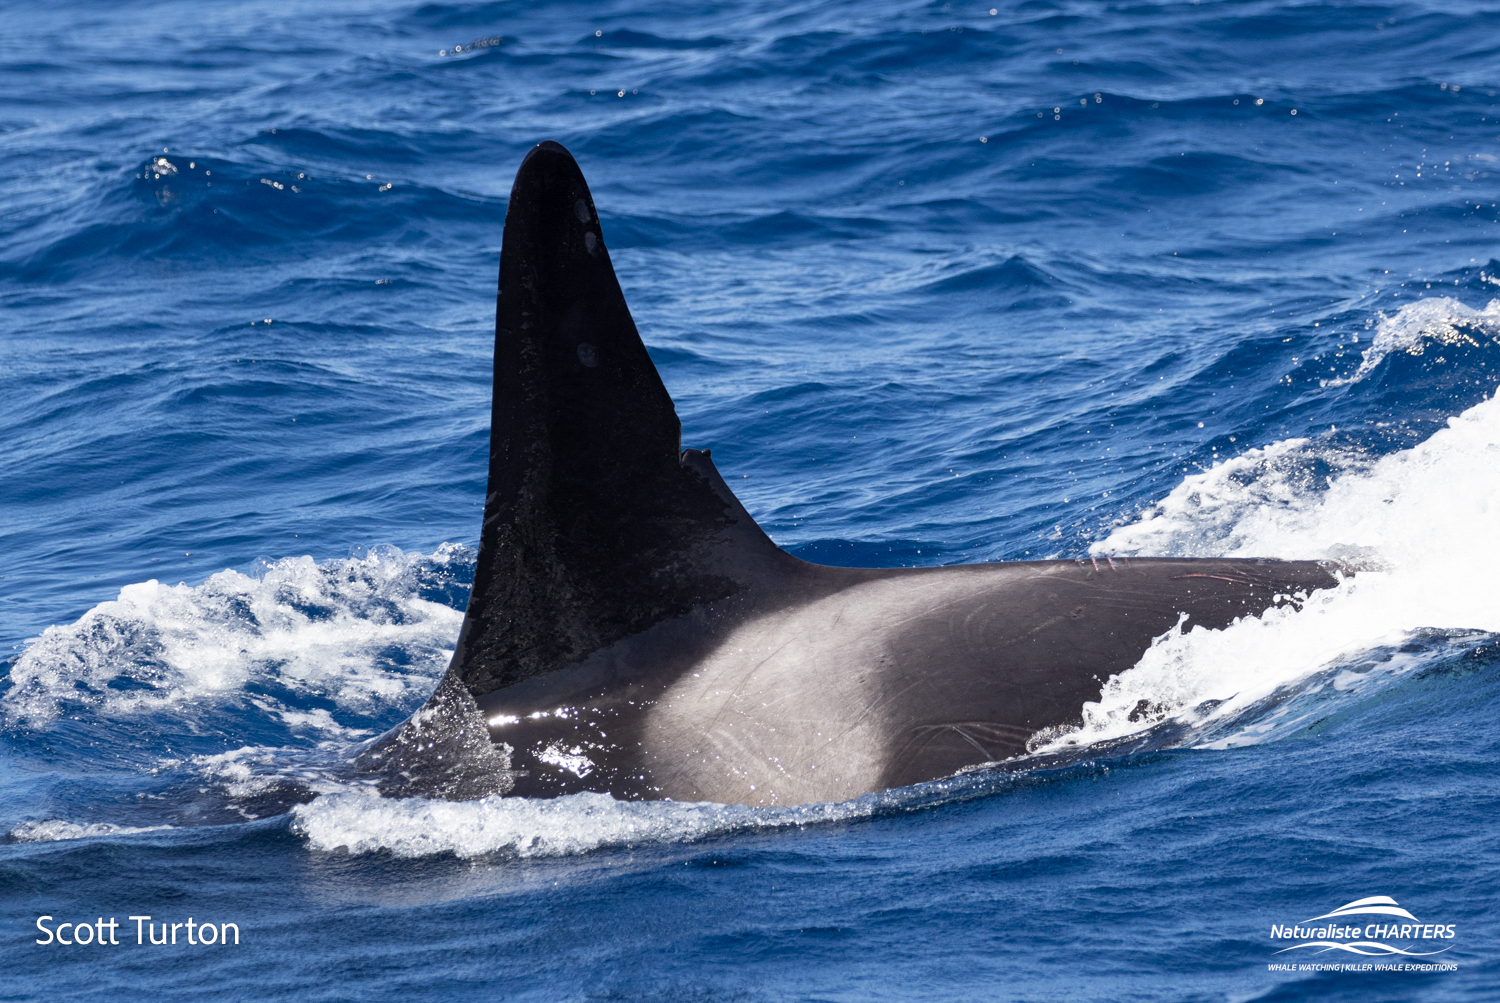 Orca are identified by their eye and saddle patches